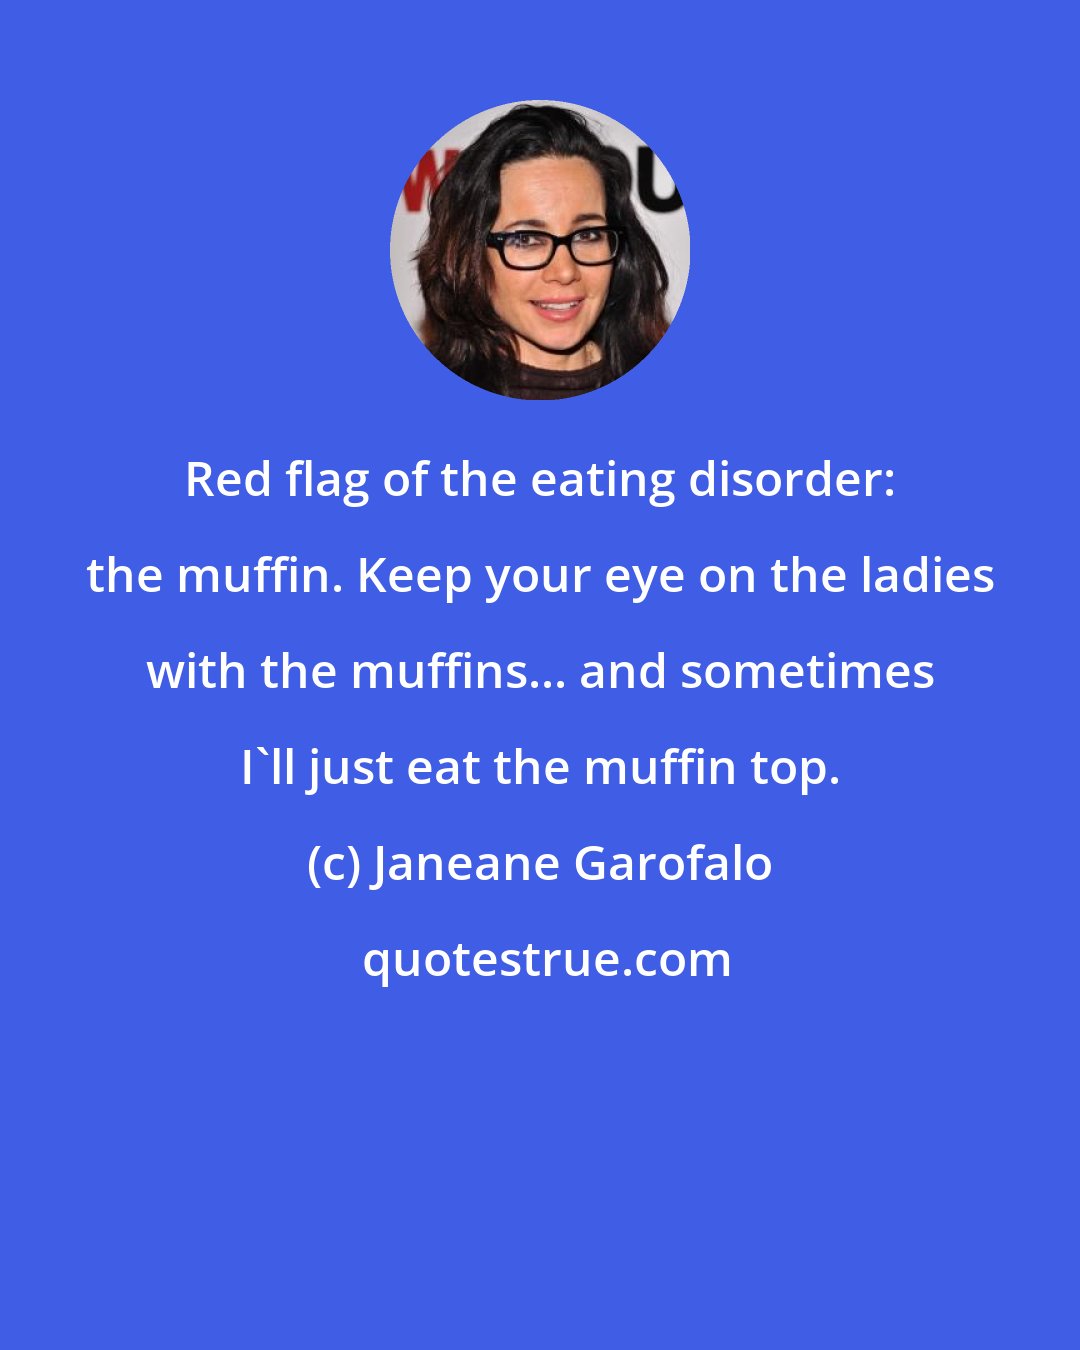 Janeane Garofalo: Red flag of the eating disorder: the muffin. Keep your eye on the ladies with the muffins... and sometimes I'll just eat the muffin top.